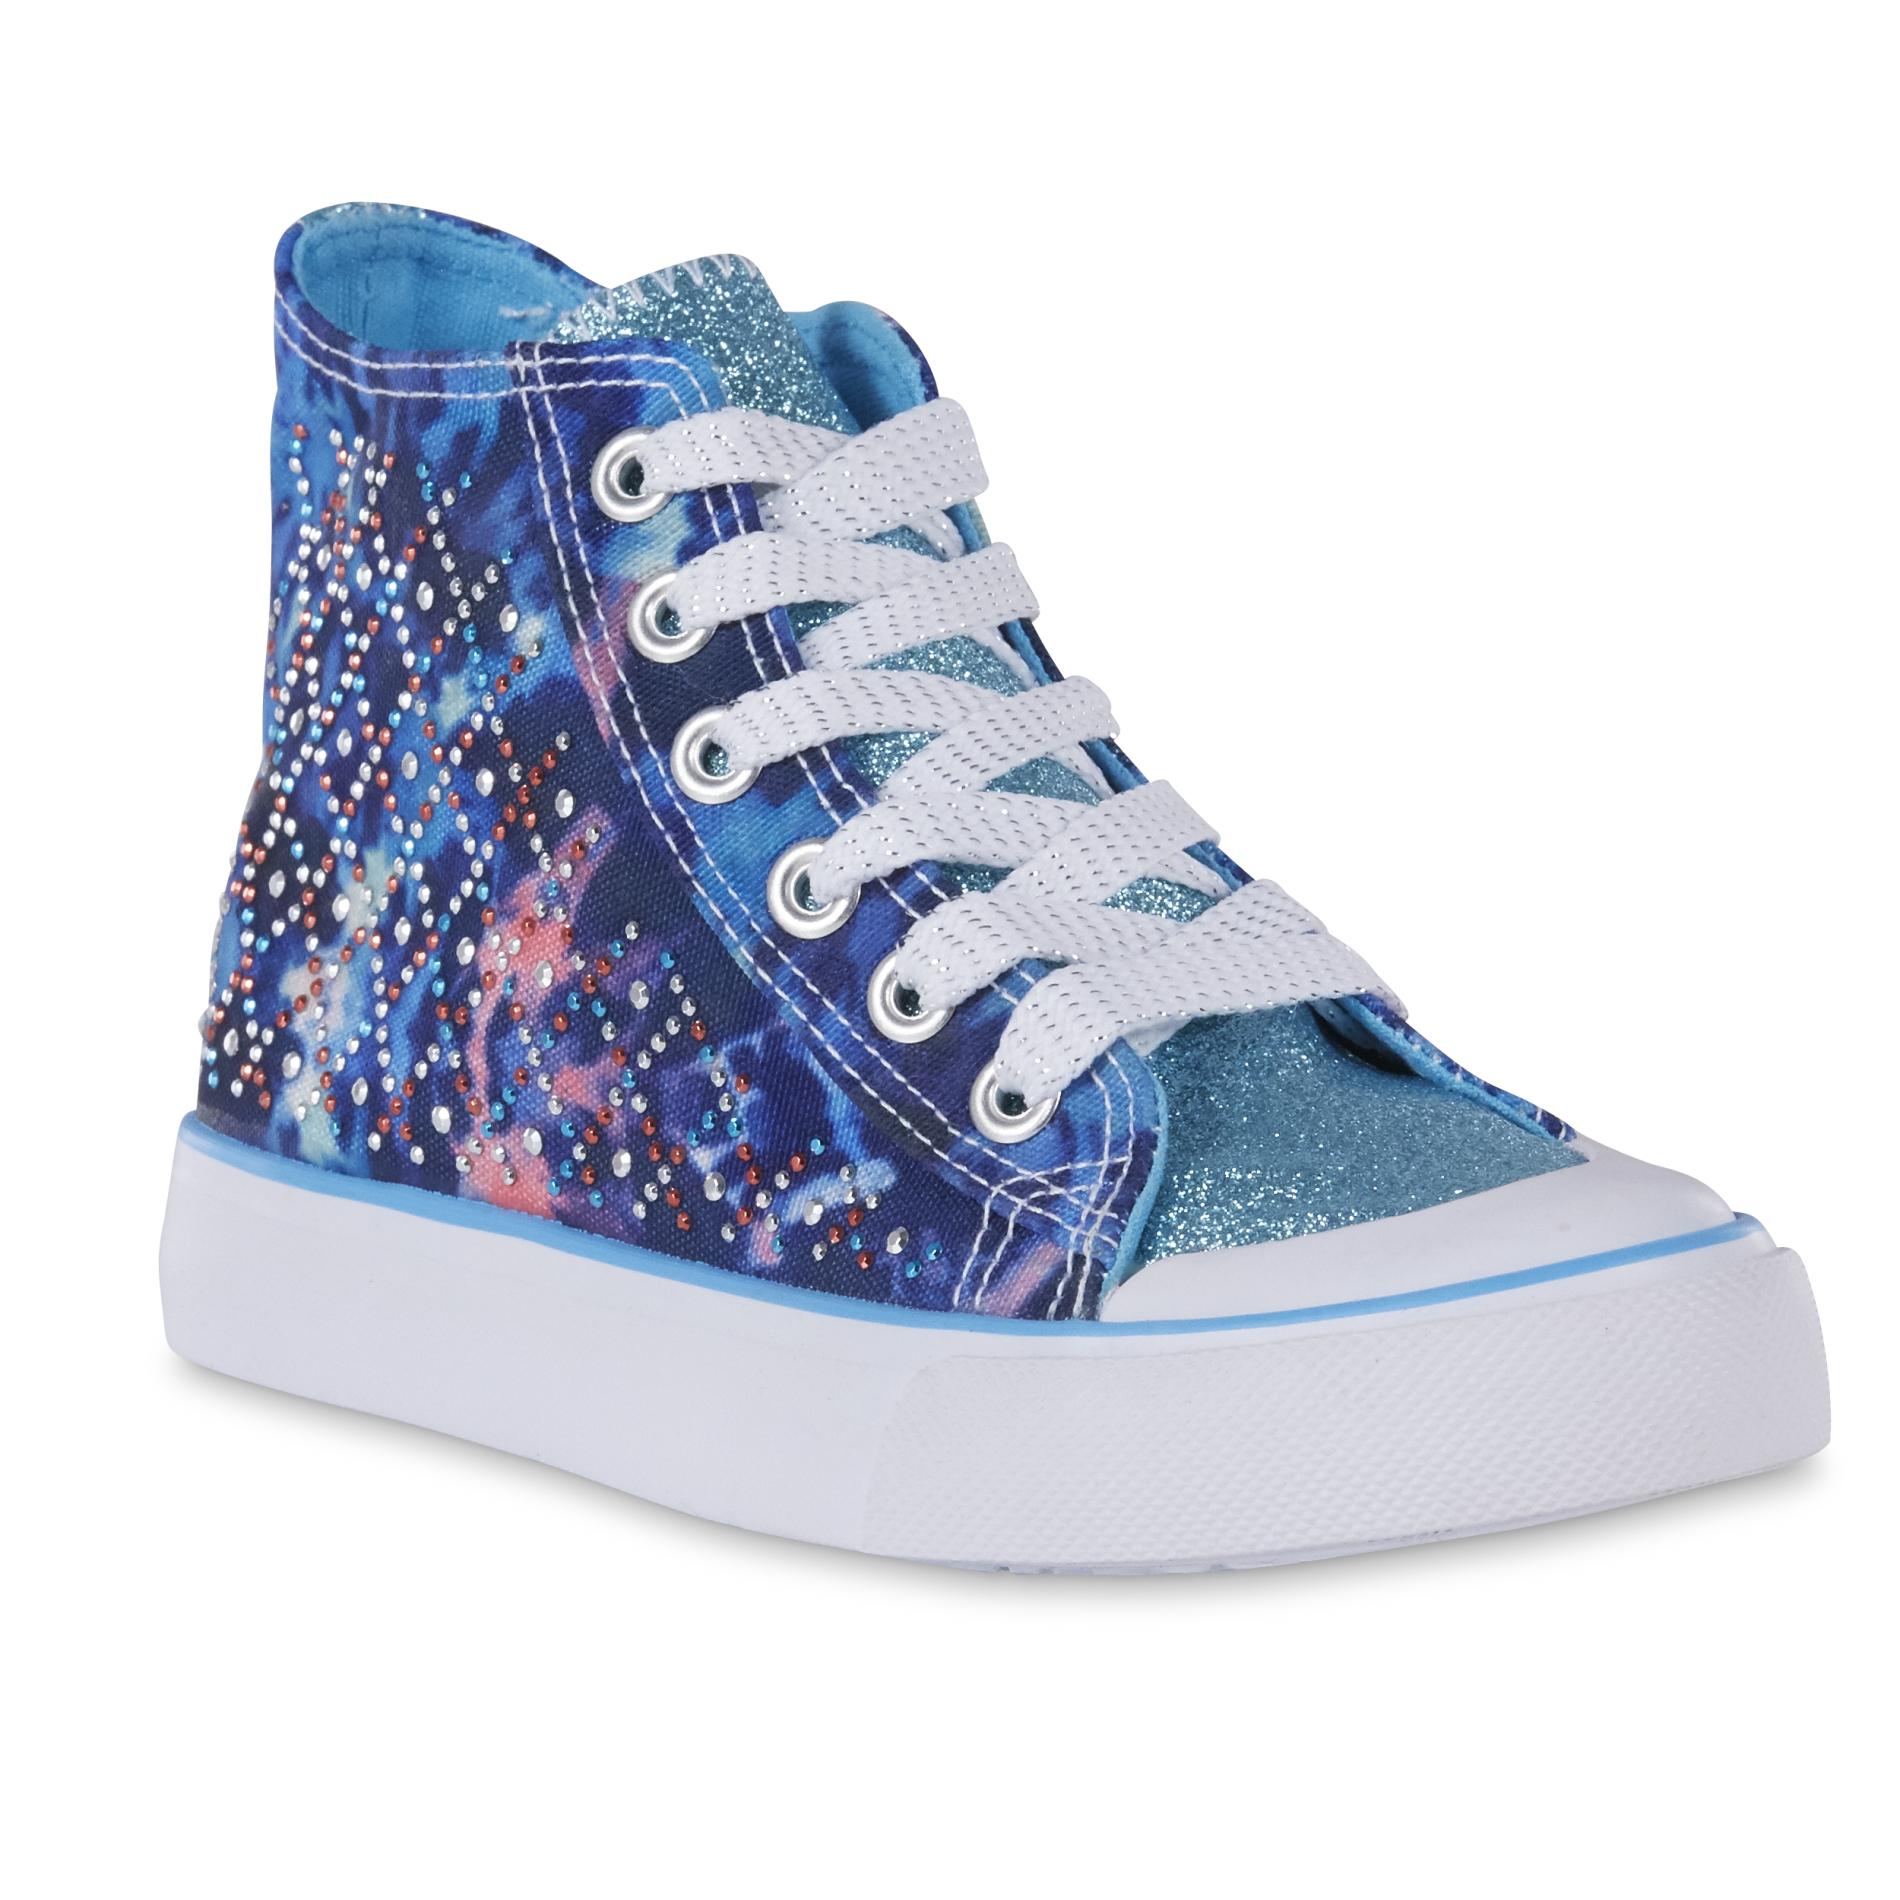 Piper Girls' Donna High-Top Blue Sneaker - Shoes - Baby & Kids Shoes